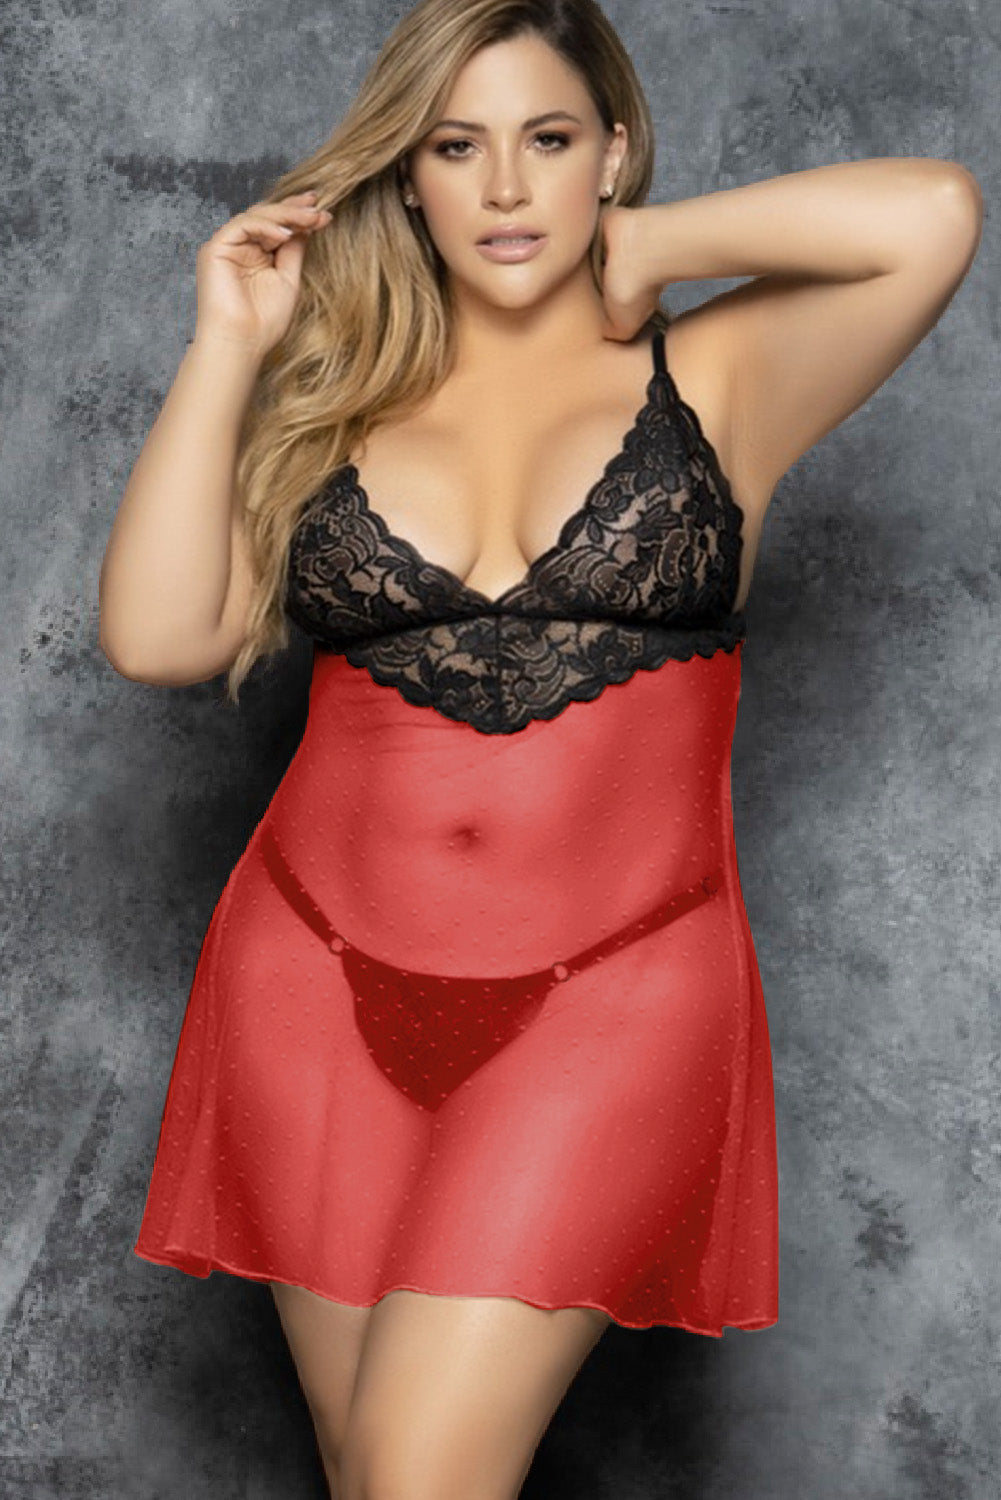 Red Plus Size Sheer Babydoll Lingerie Set Sexy Dress Outlet